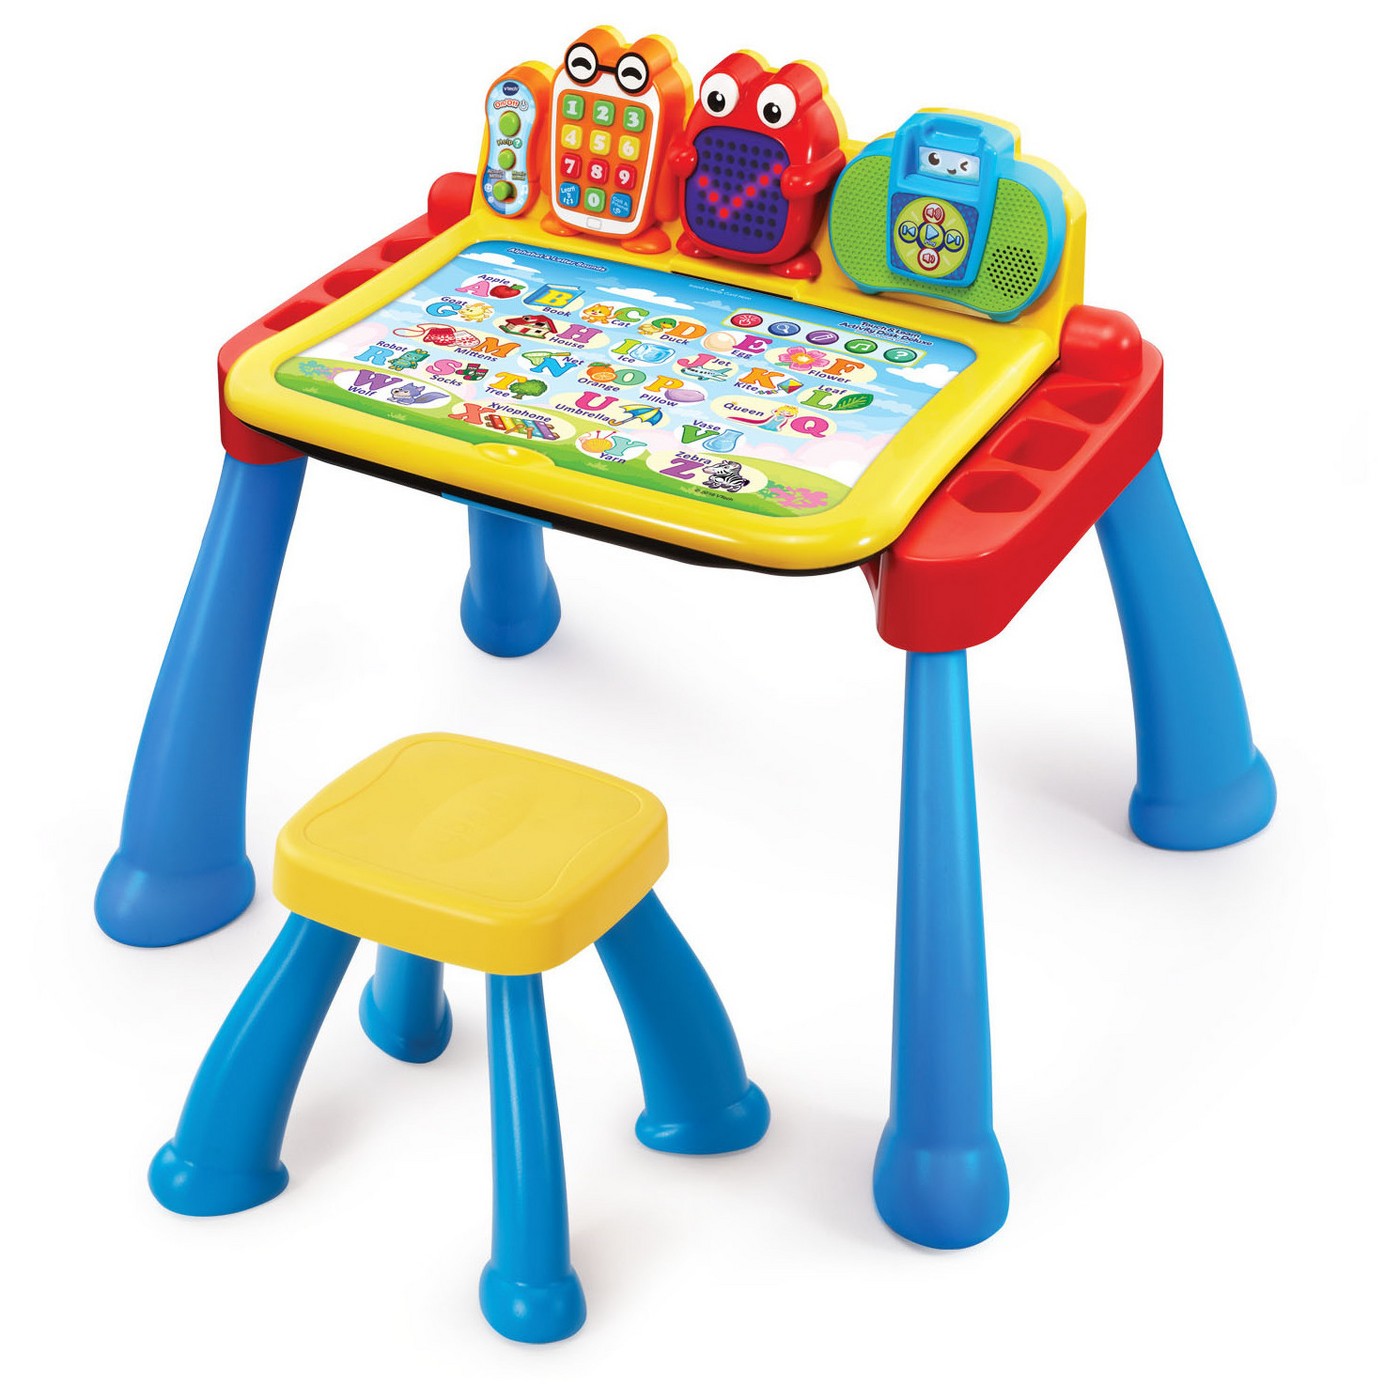 VTech Touch and Learn Activity Desk Deluxe - image 1 of 9